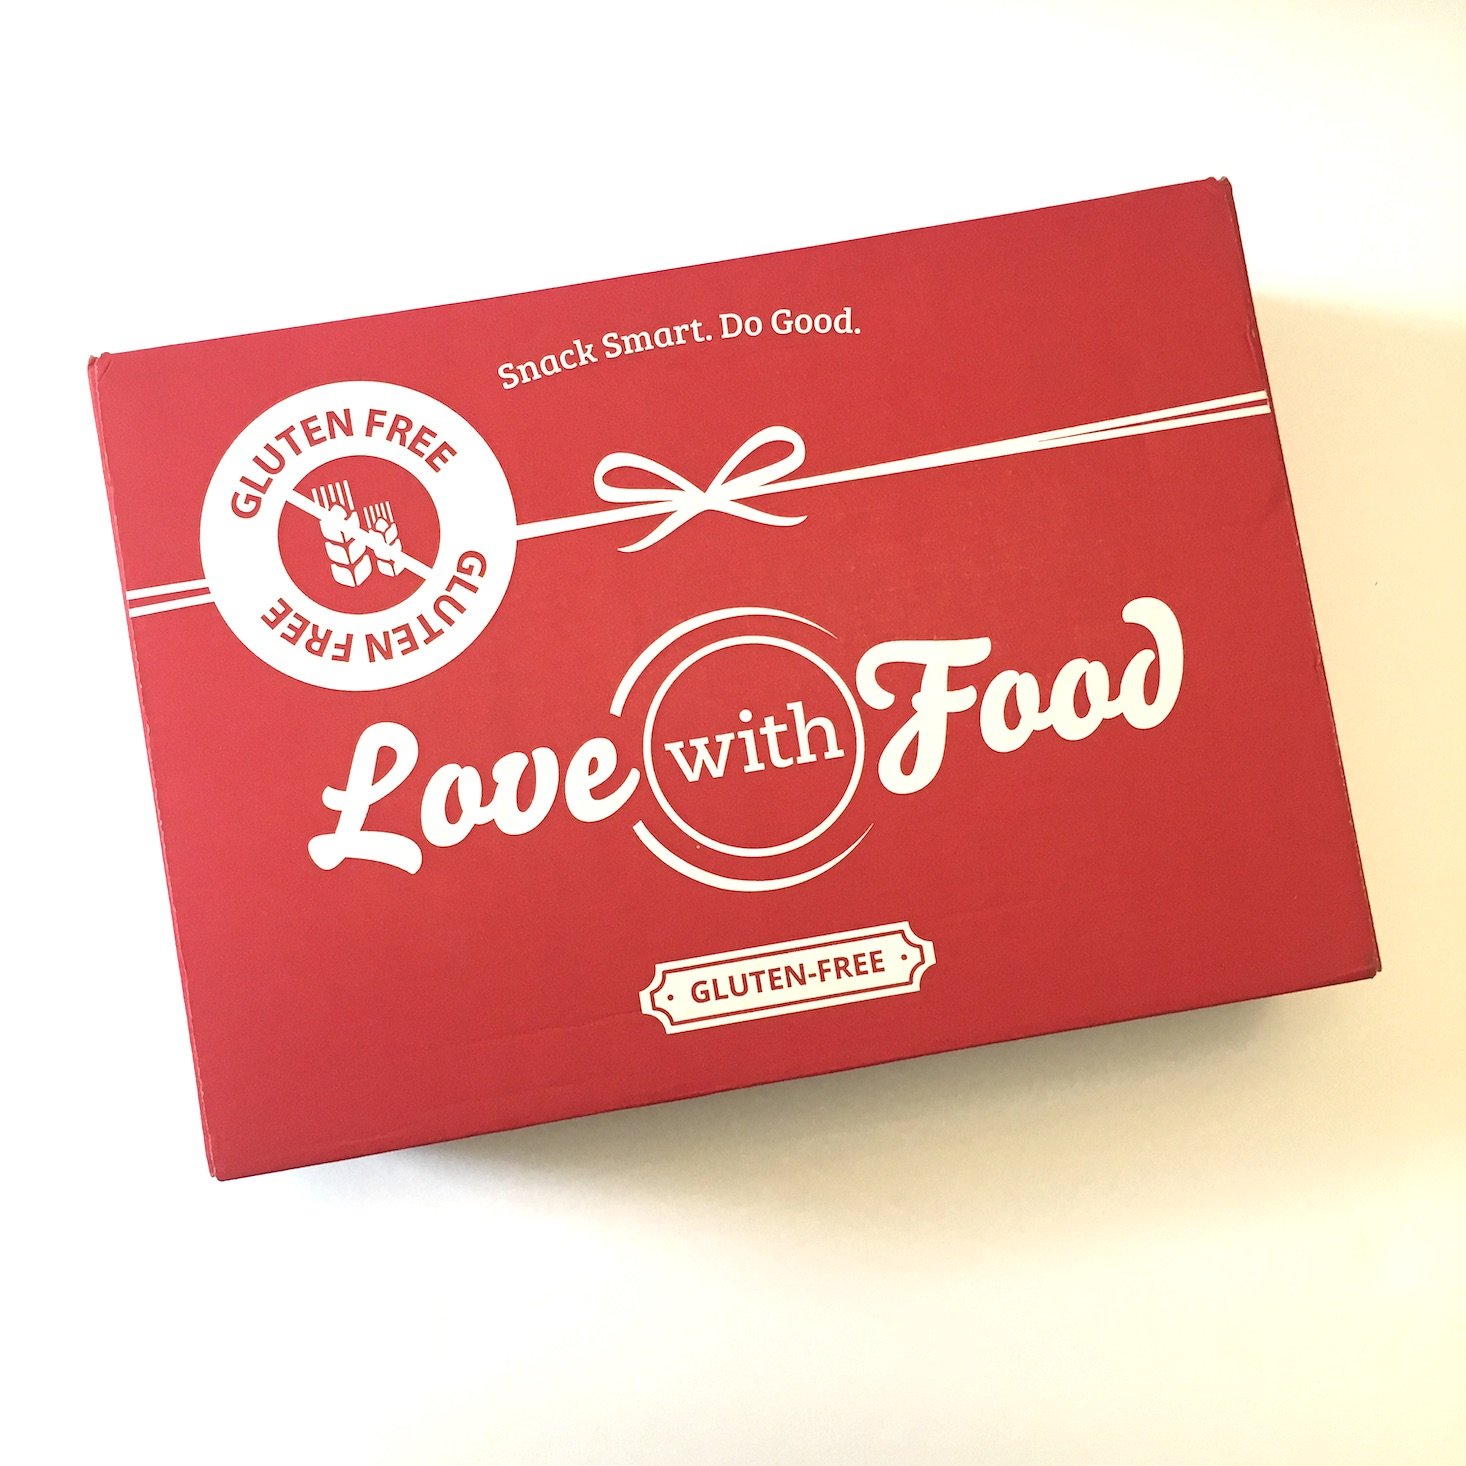 Love with Food Gluten Free Box Review + Coupon – May 2018